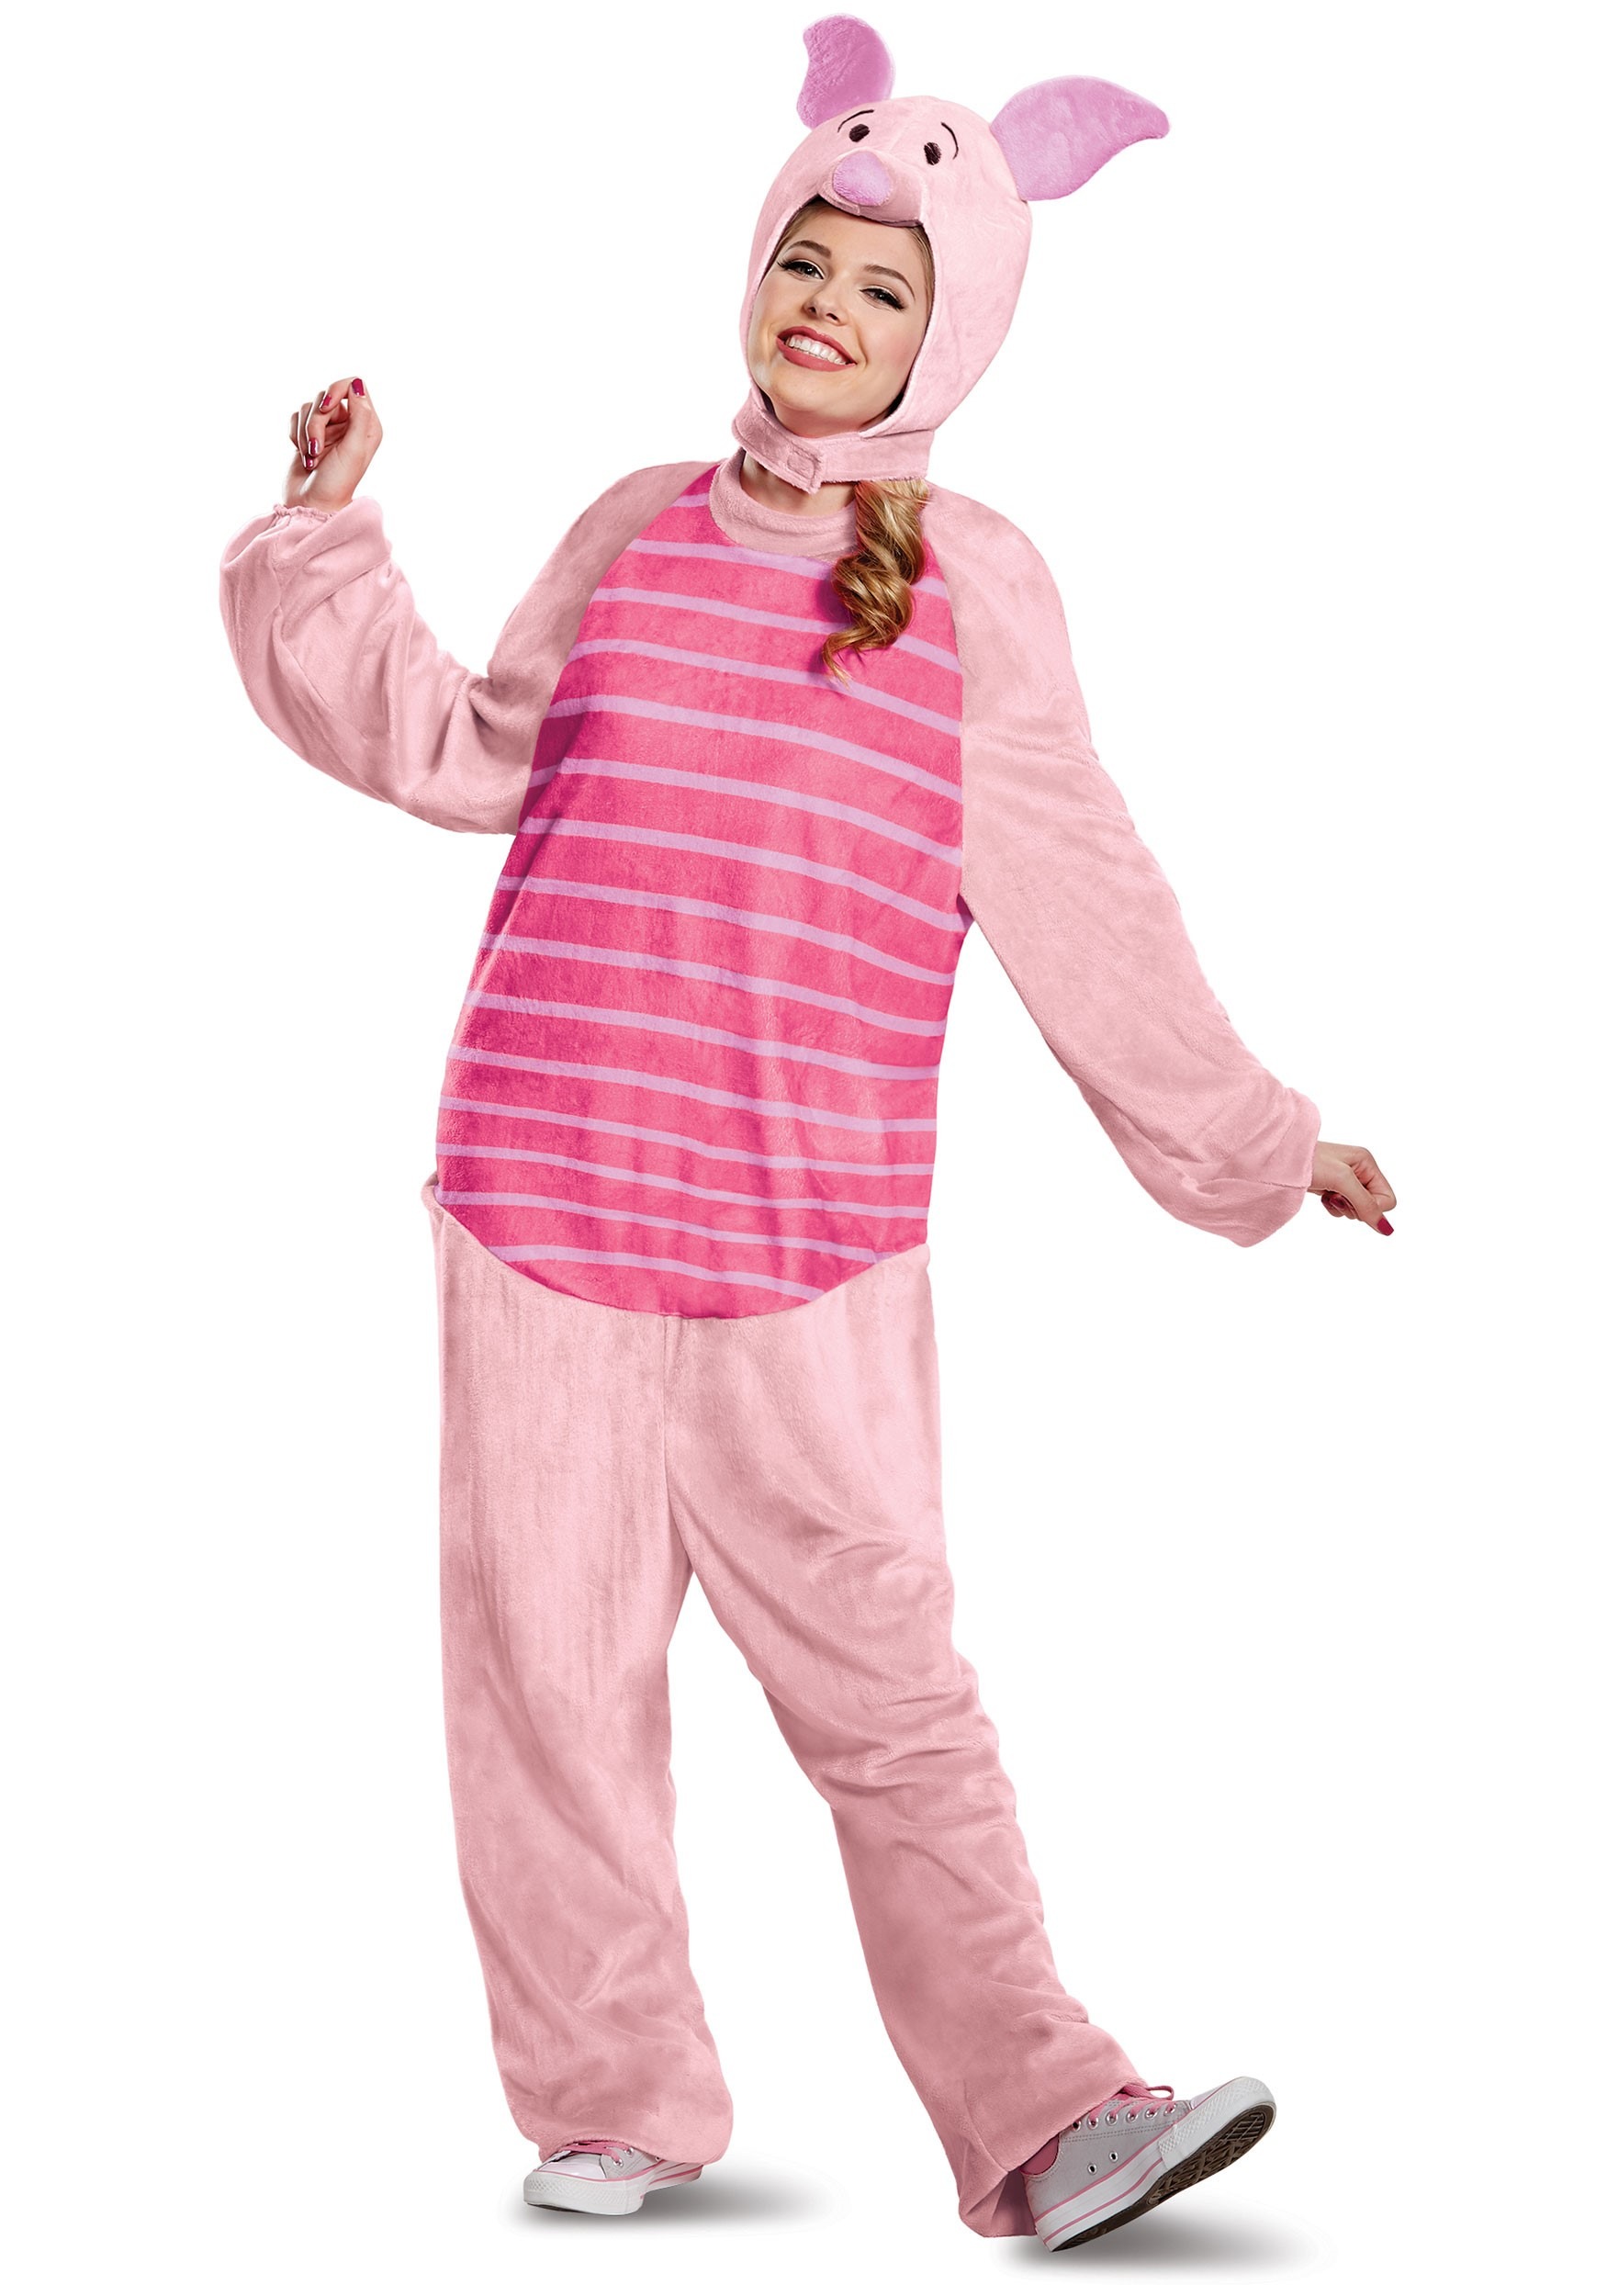 Image of Winnie the Pooh Piglet Deluxe Costume for Adults ID DI65578-M/L